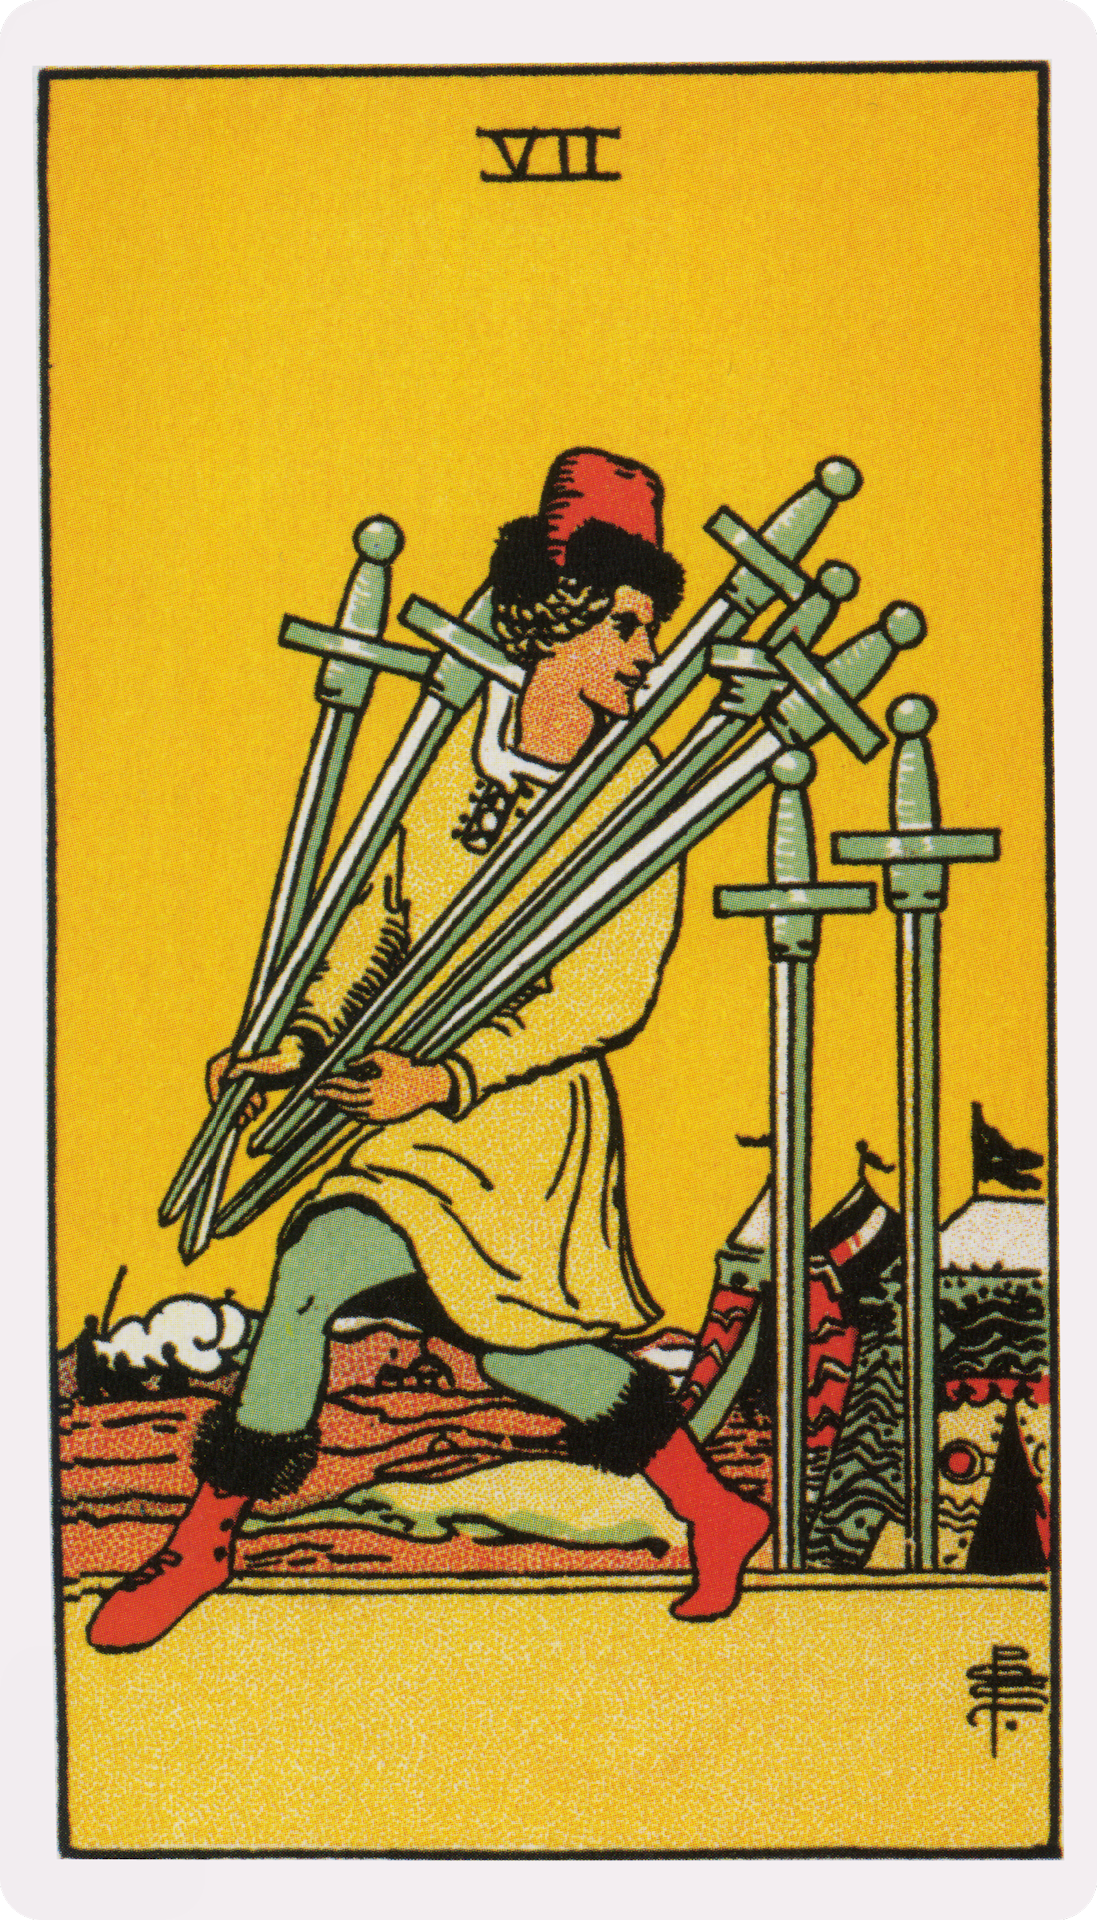 Is Seven of Swords a yes card?